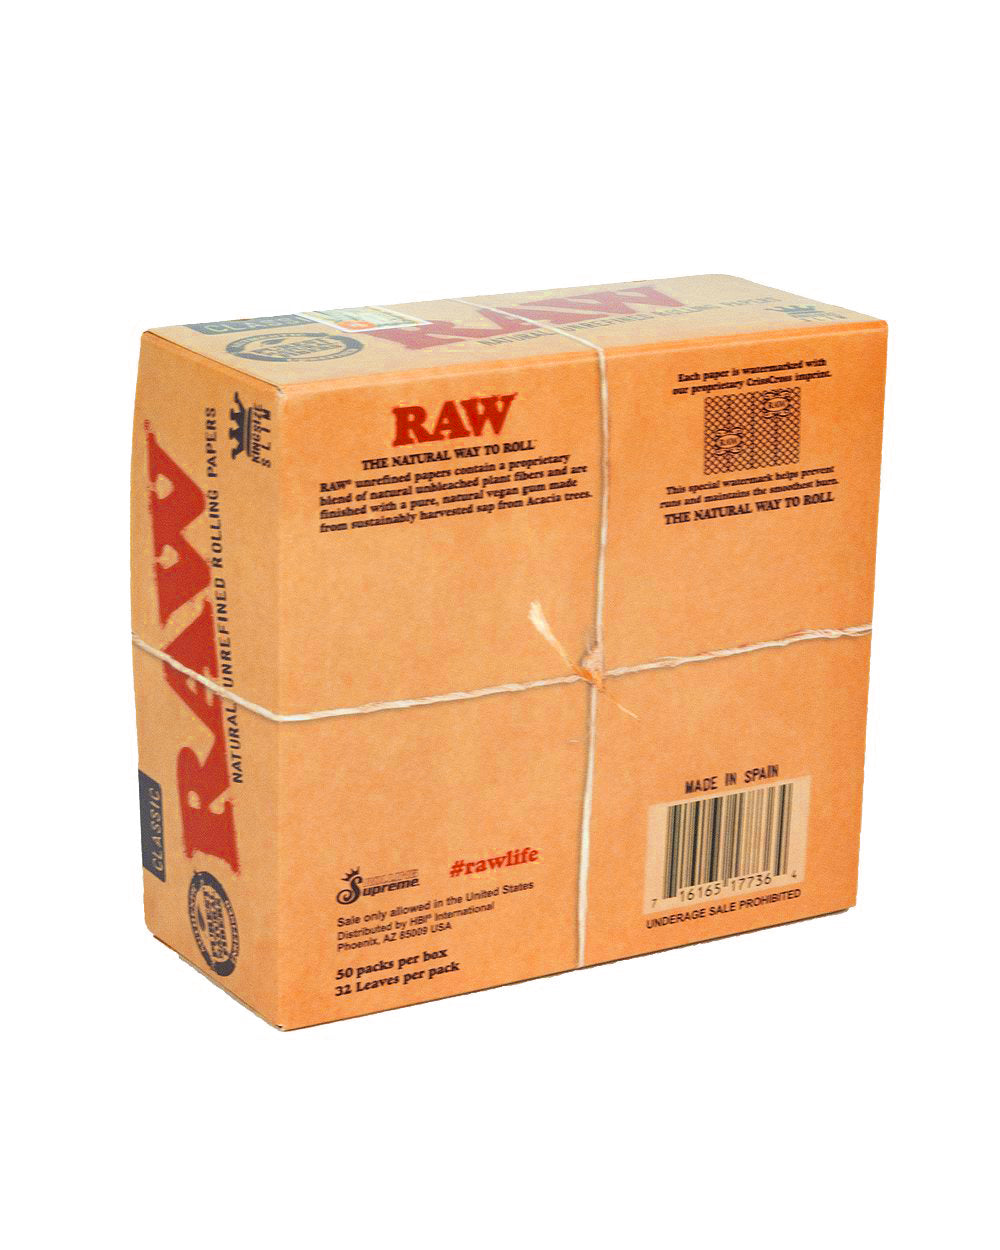 RAW | 'Retail Display' King Size Slim Ultra Thin Rolling Papers | 110mm - Classic - 50 Count - 5